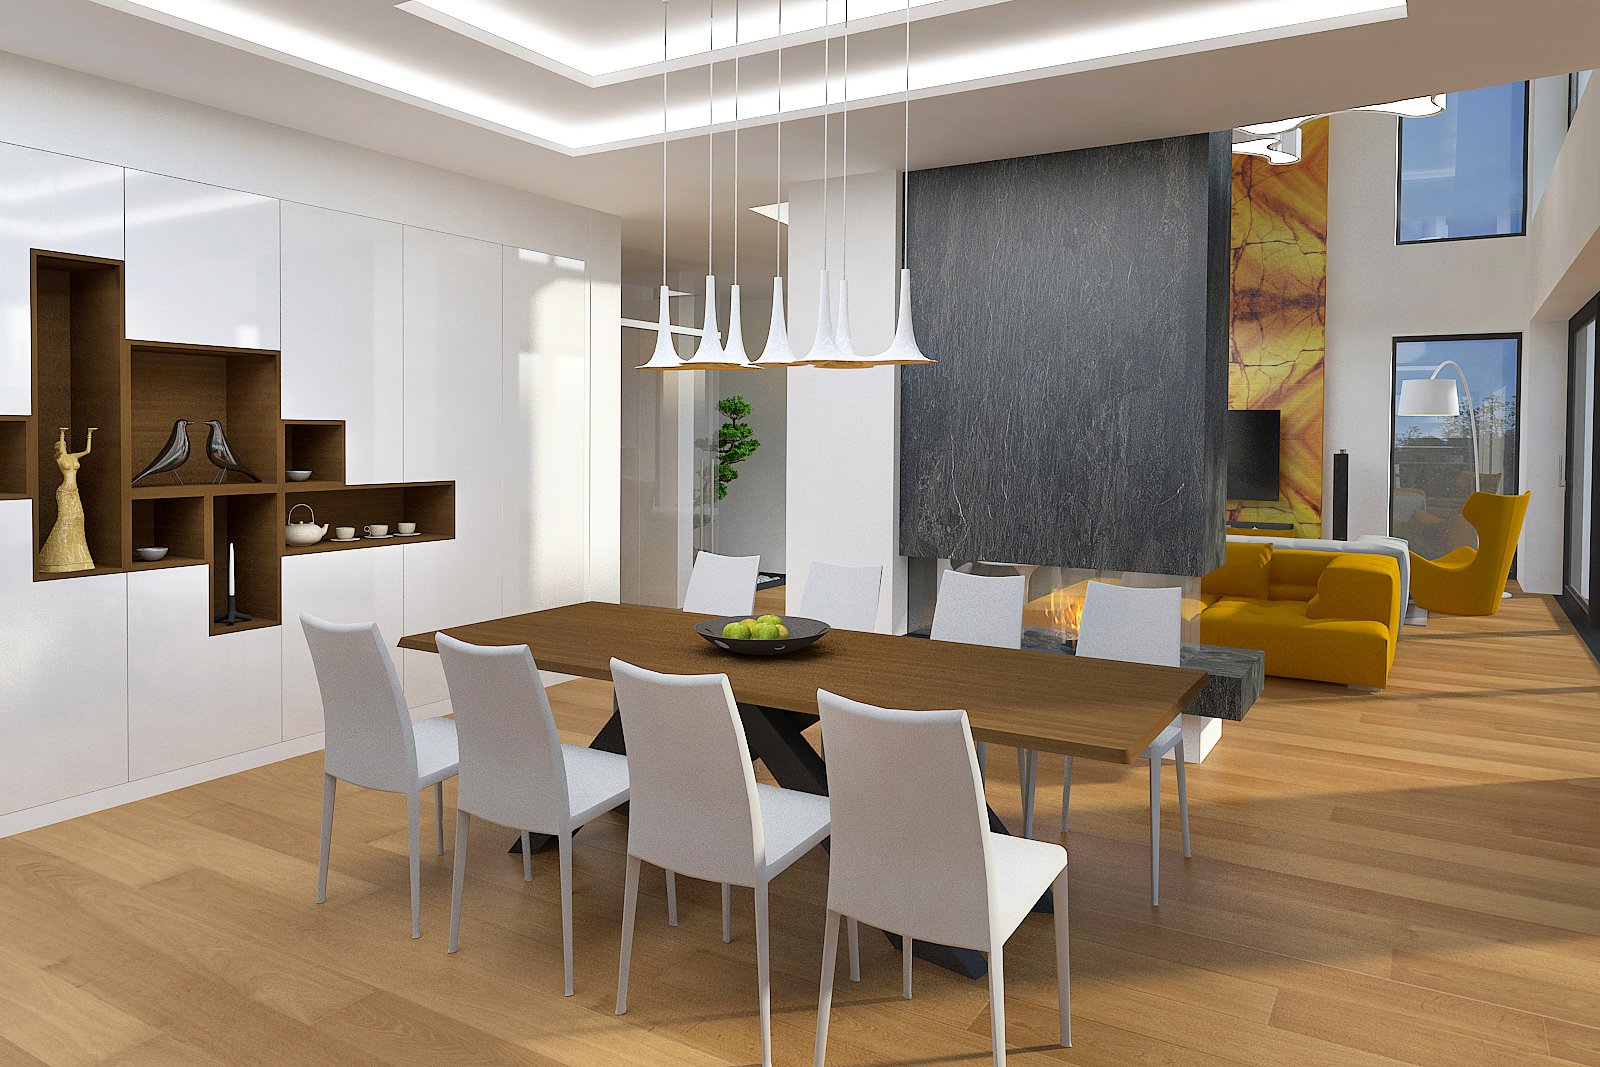 Not only is the functionality and stability of the dining table important, but also its aesthetic value.